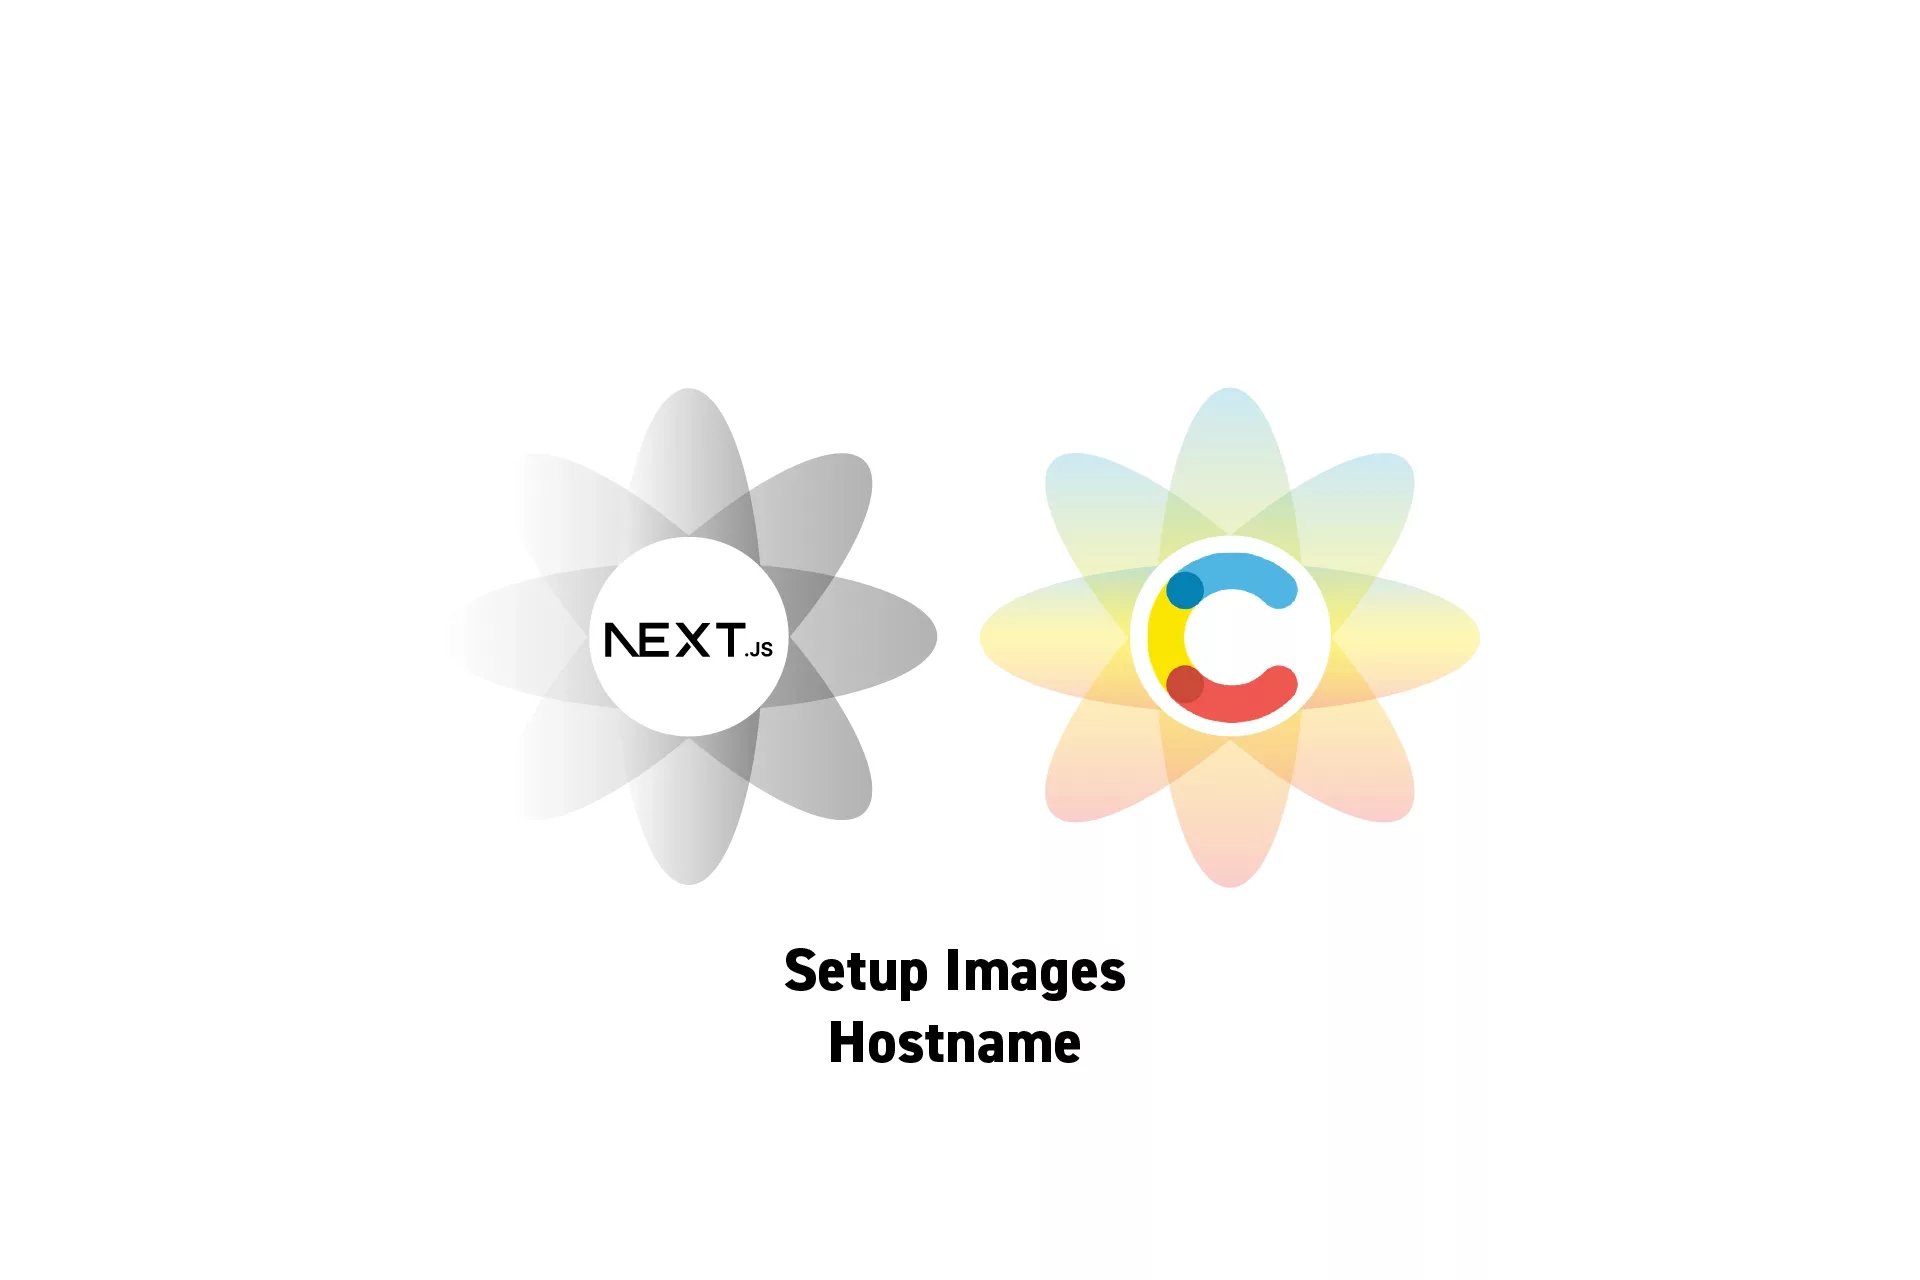 Two flowers that represents NextJS and Contentful side by side with the text "Setup Images Hostname” beneath it.